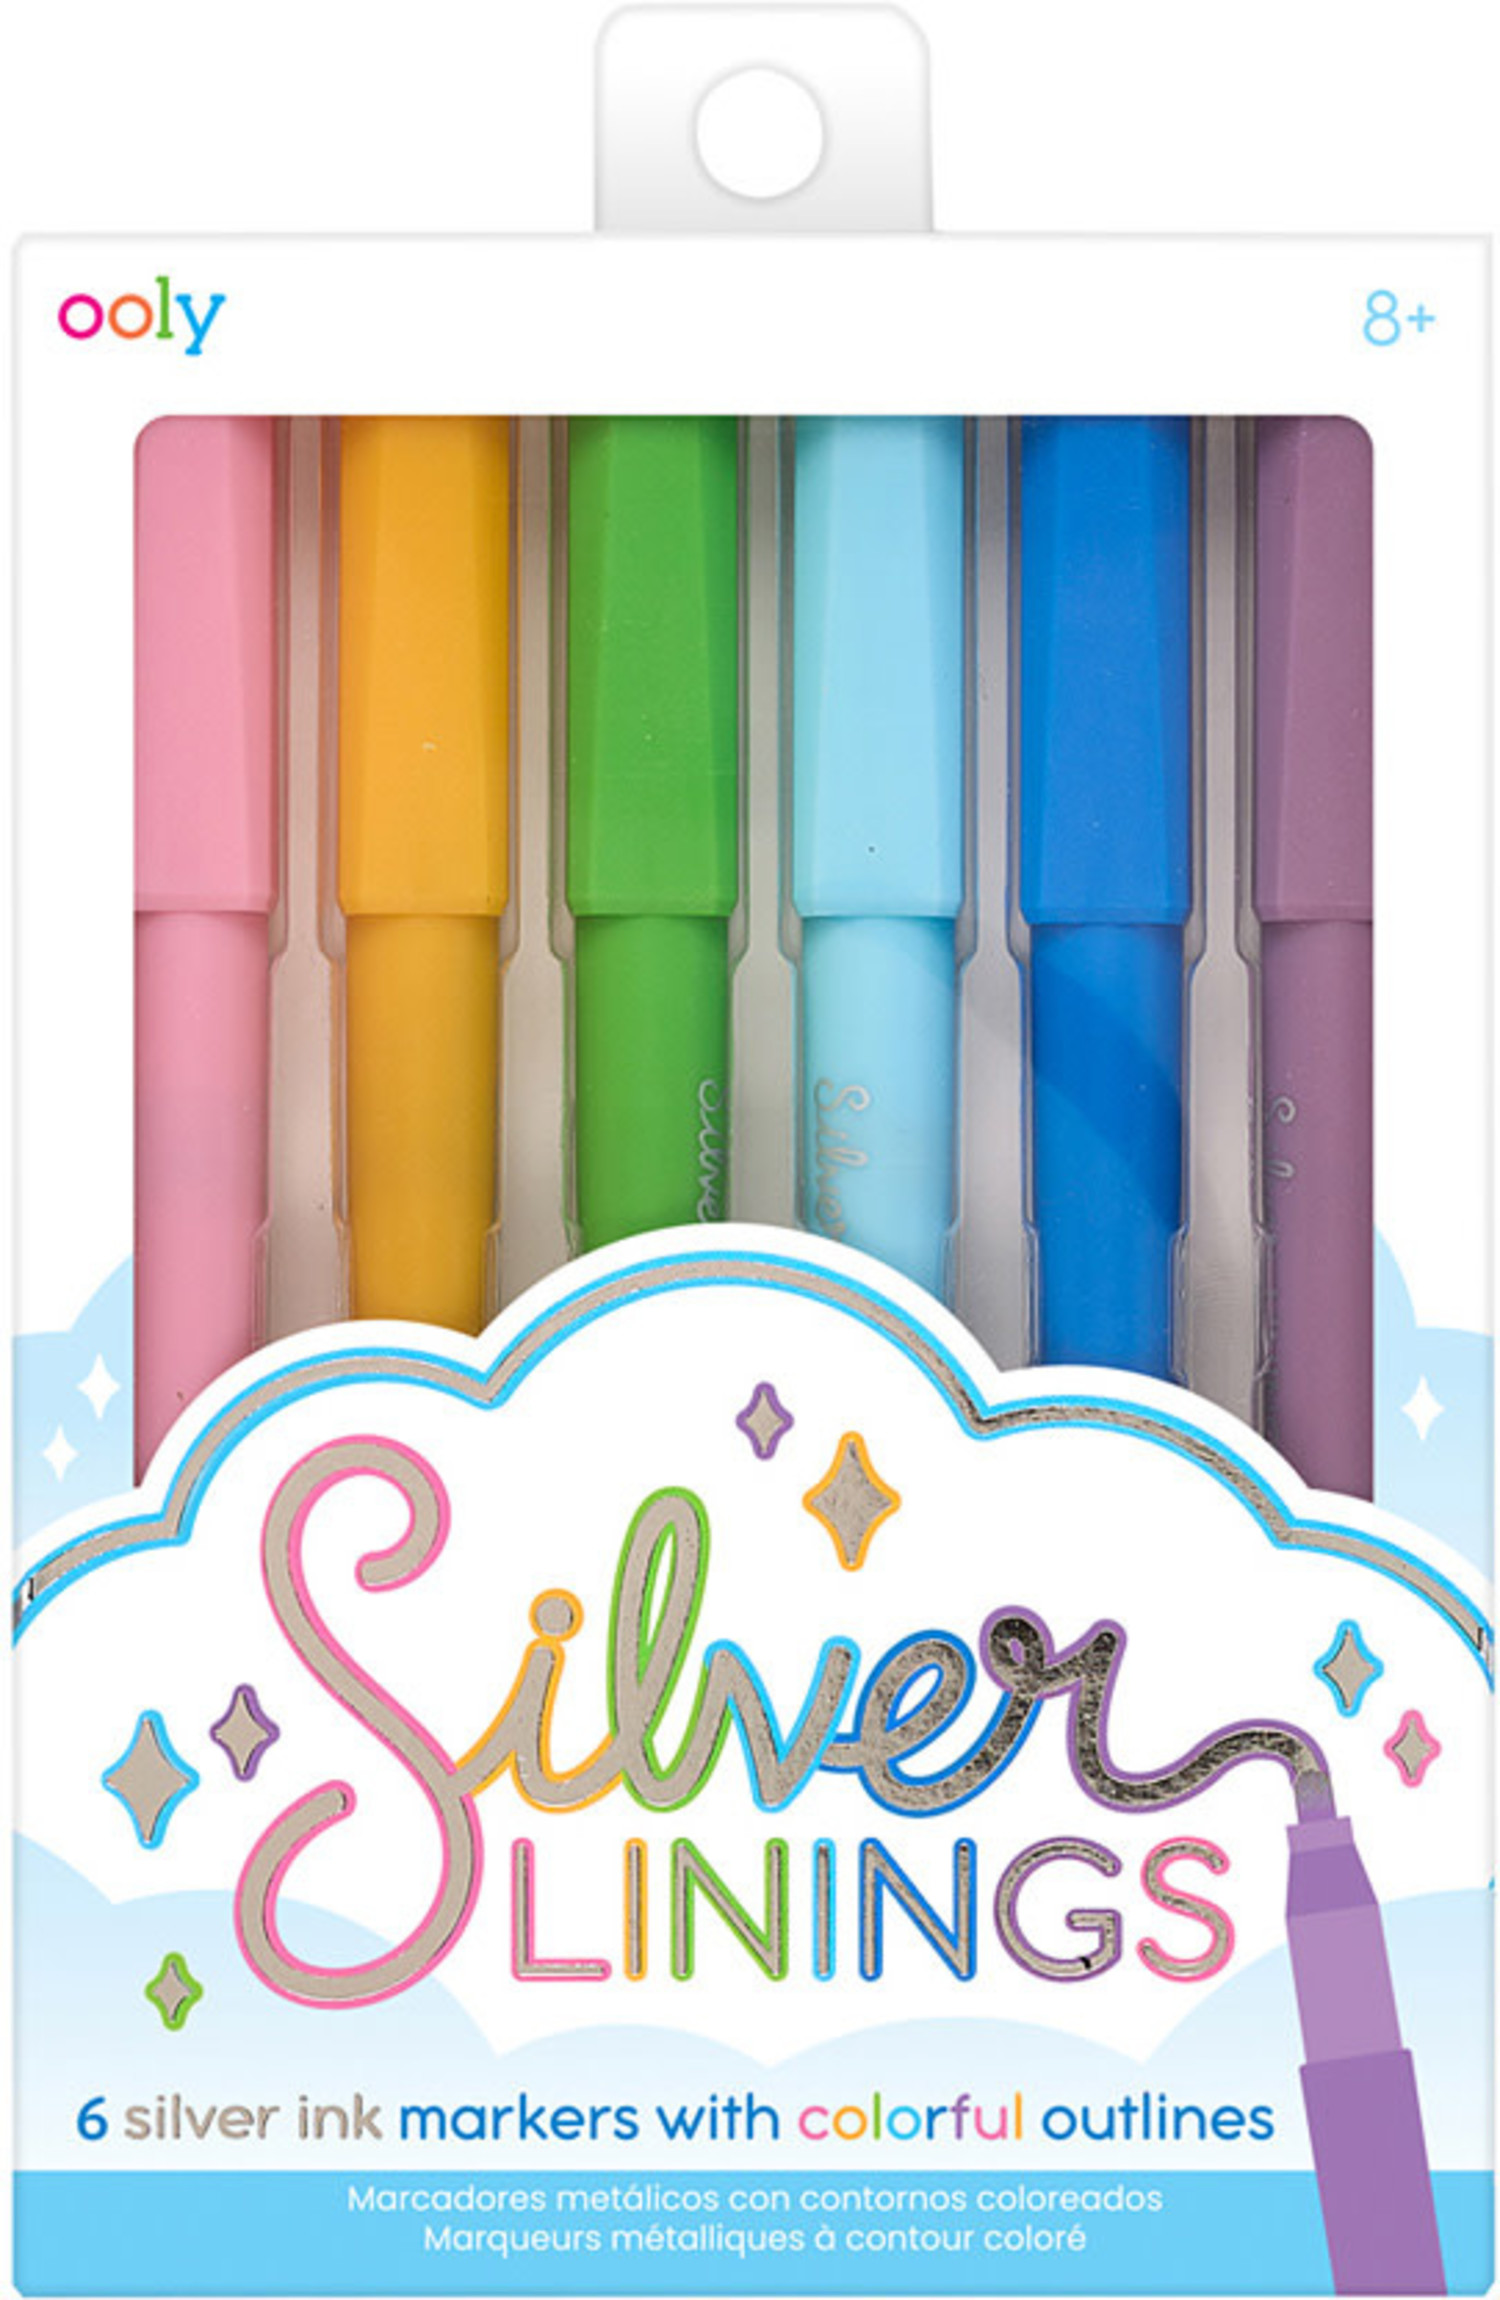 SILVER LININGS OUTLINE MARKERS SET OF 6 - Breazy Beach